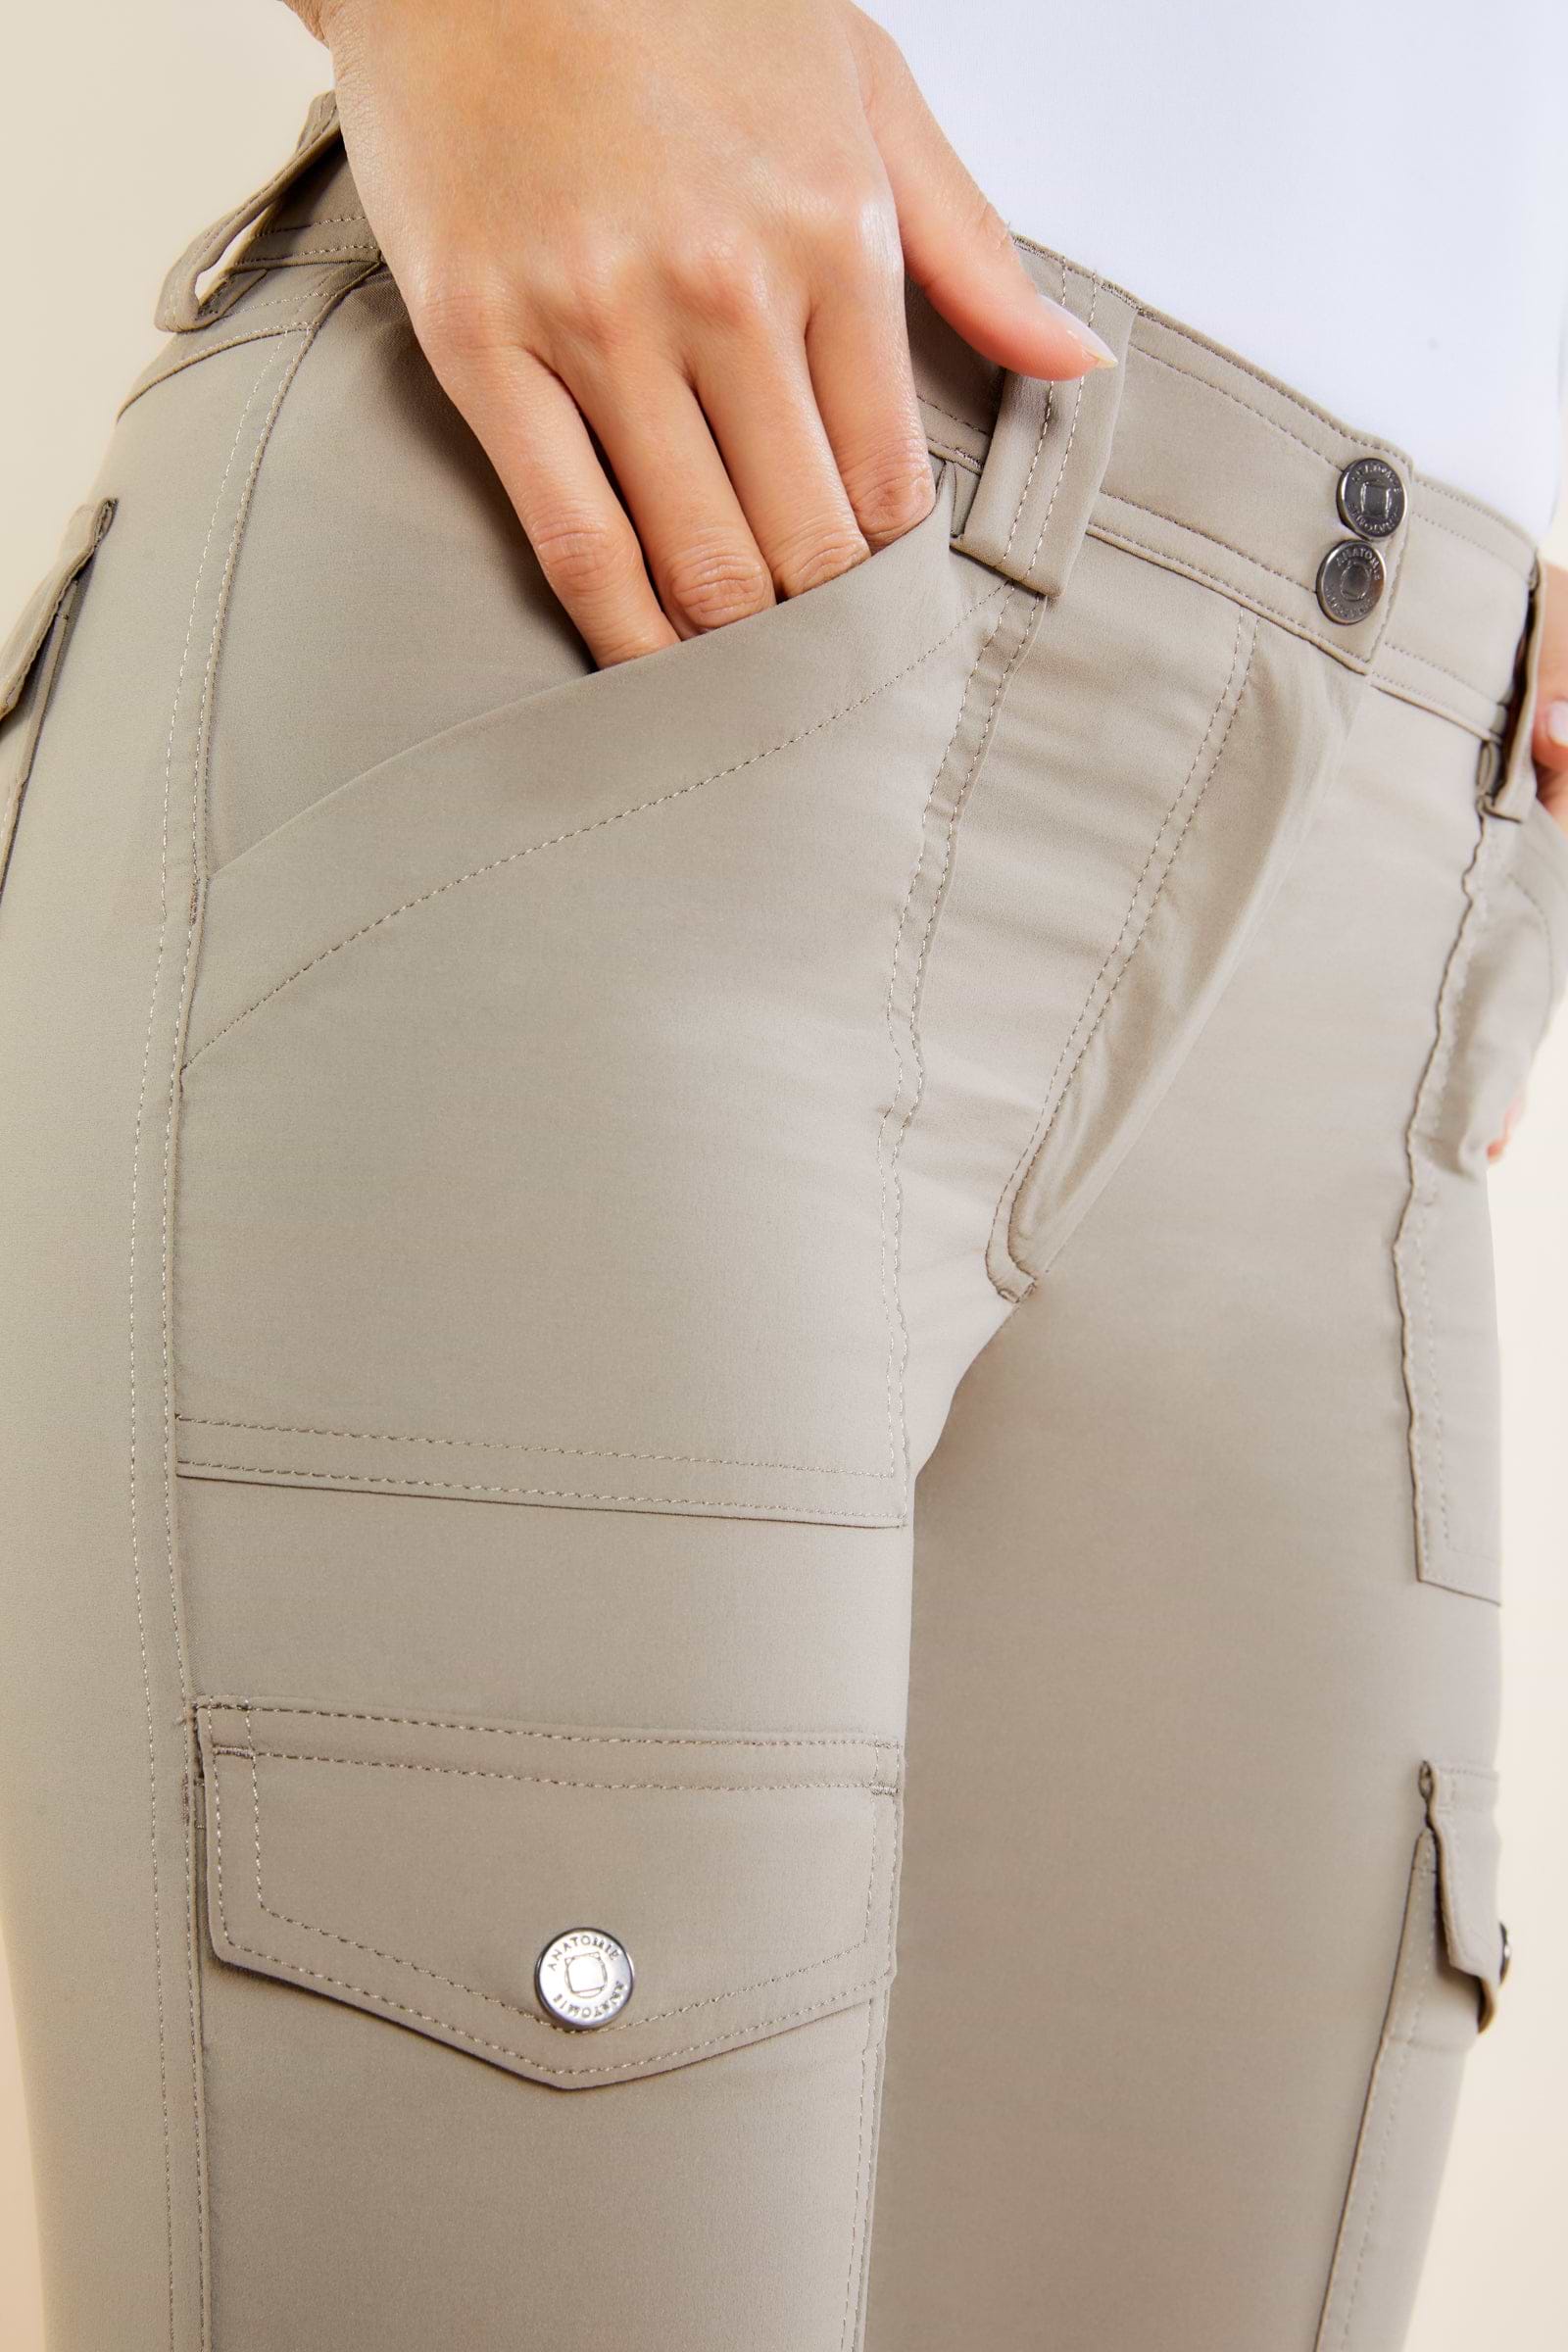 The Best Travel Cargo Pants. Front Pocket on Skinny Cargo Pant in Khaki